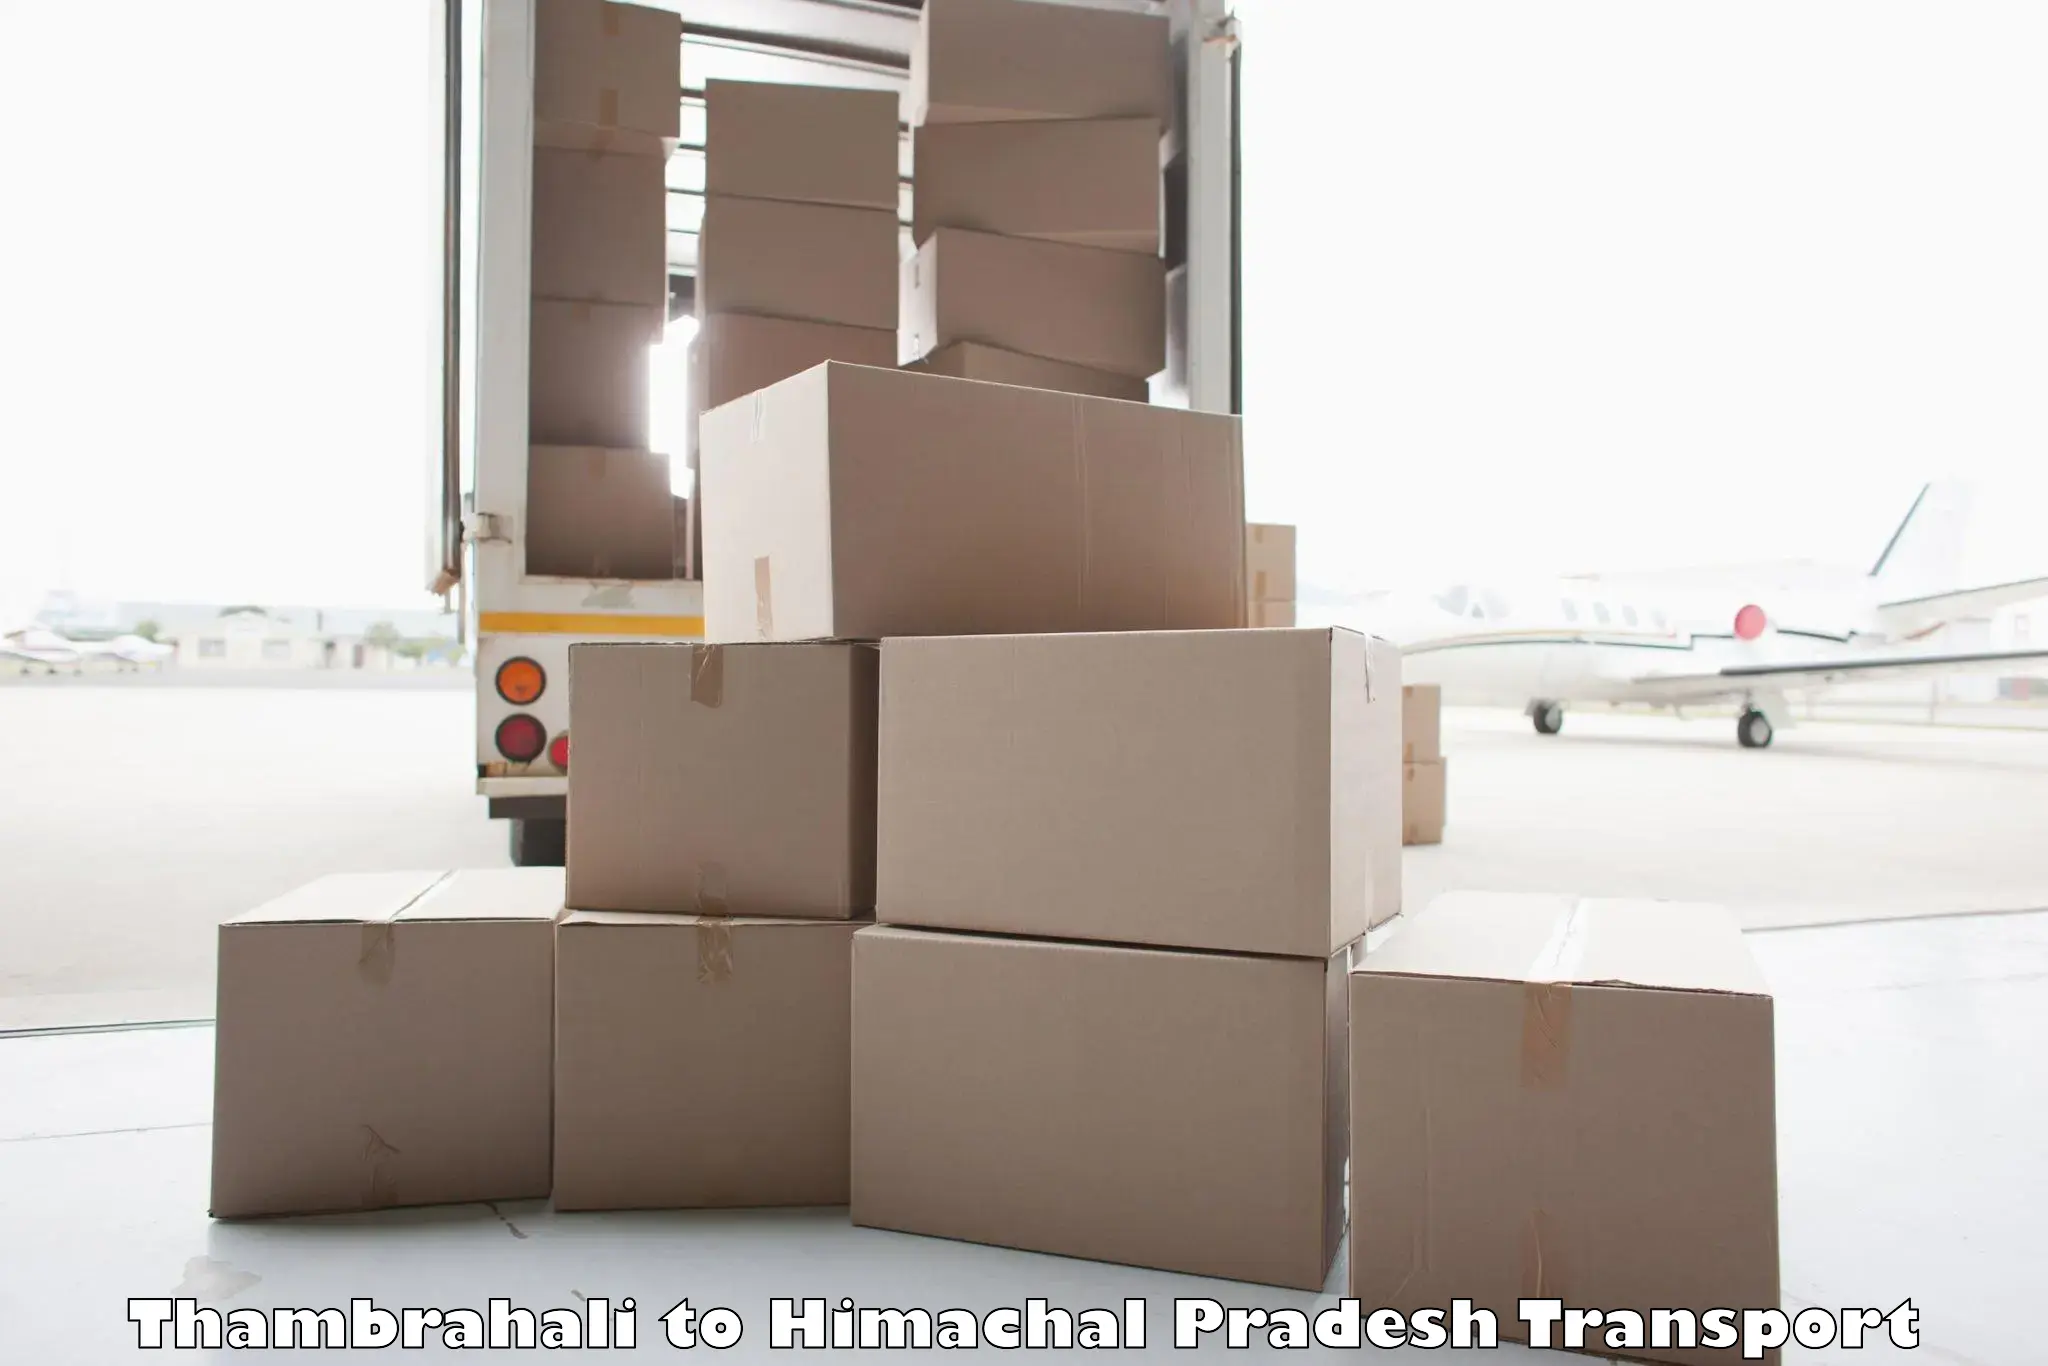 Best transport services in India Thambrahali to Himachal Pradesh